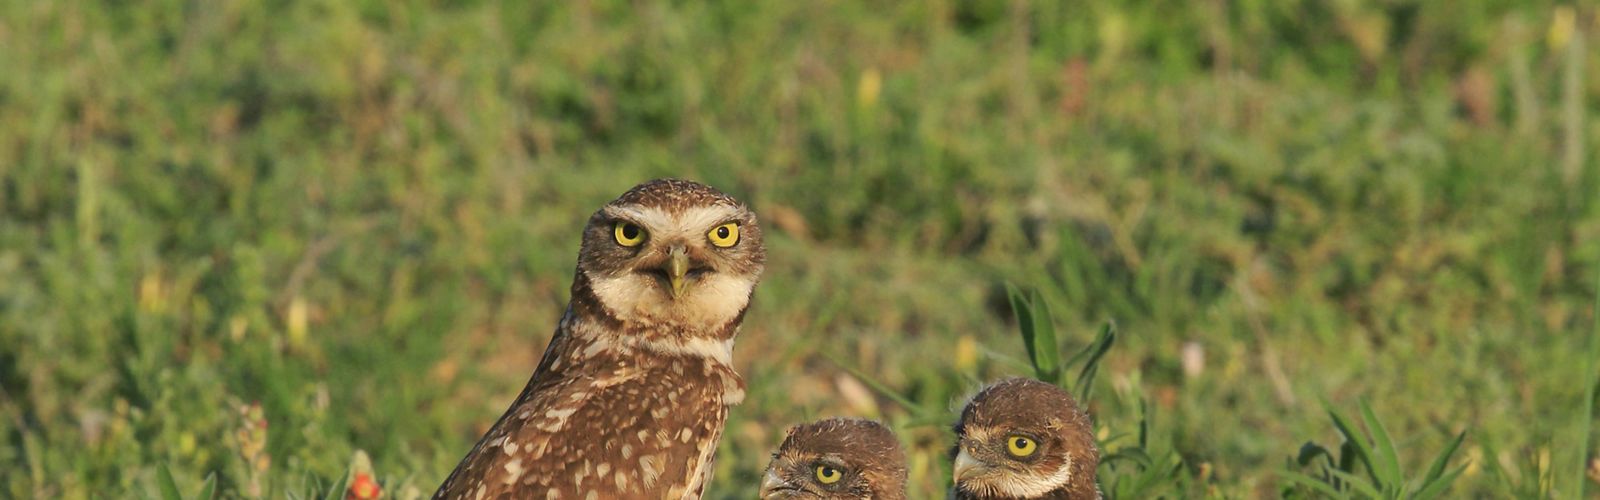 Three burrowing owls perched on the ground looking at the camera.